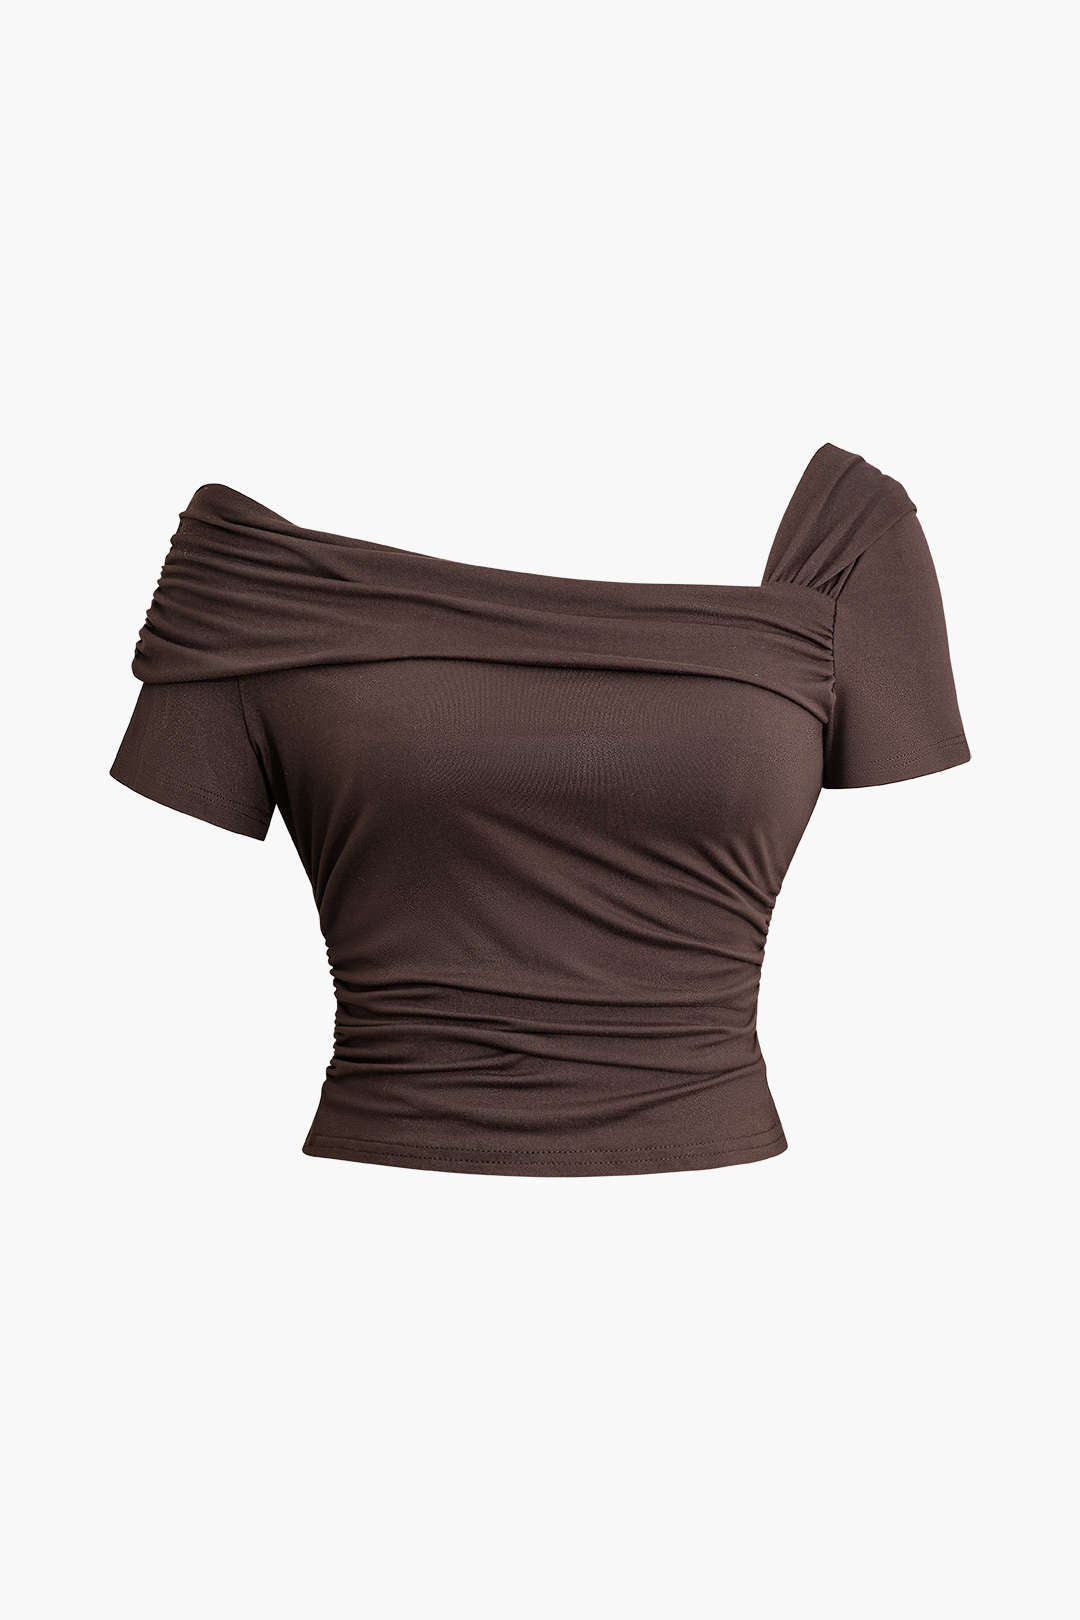 Solid Asymmetrical Ruched Crop Top